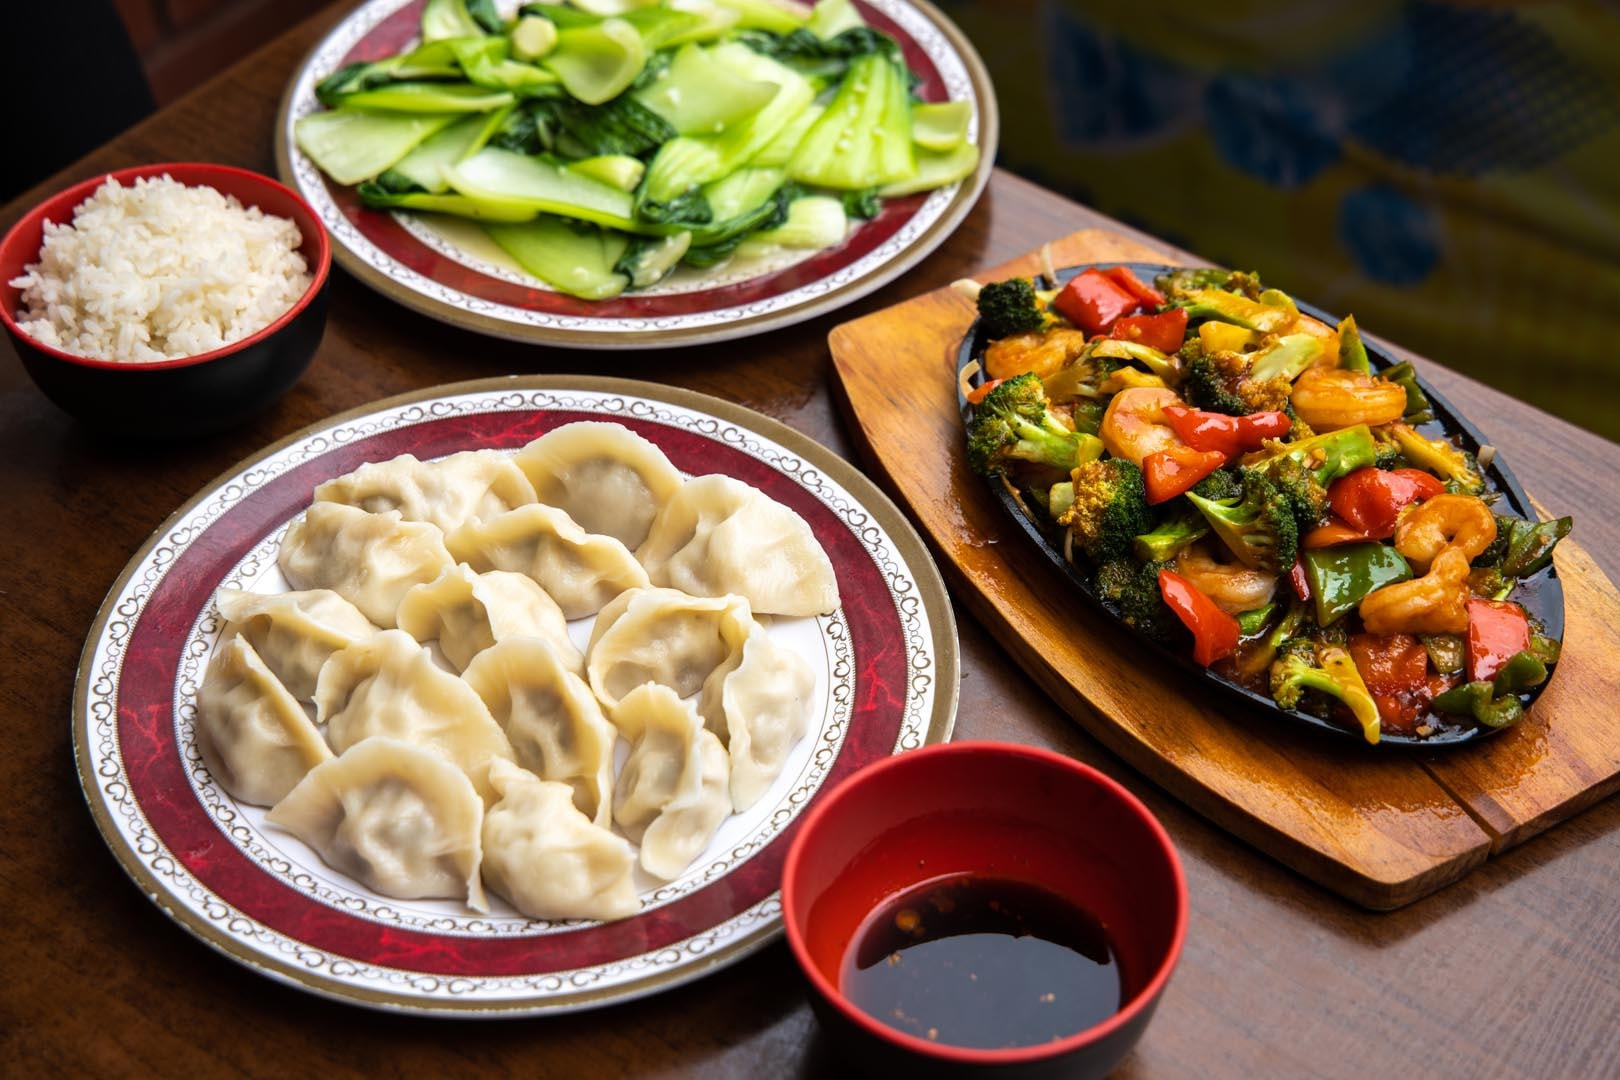 Lunch, Meal, Jiaozi, Ingredient, Cuisine, Food, Dish